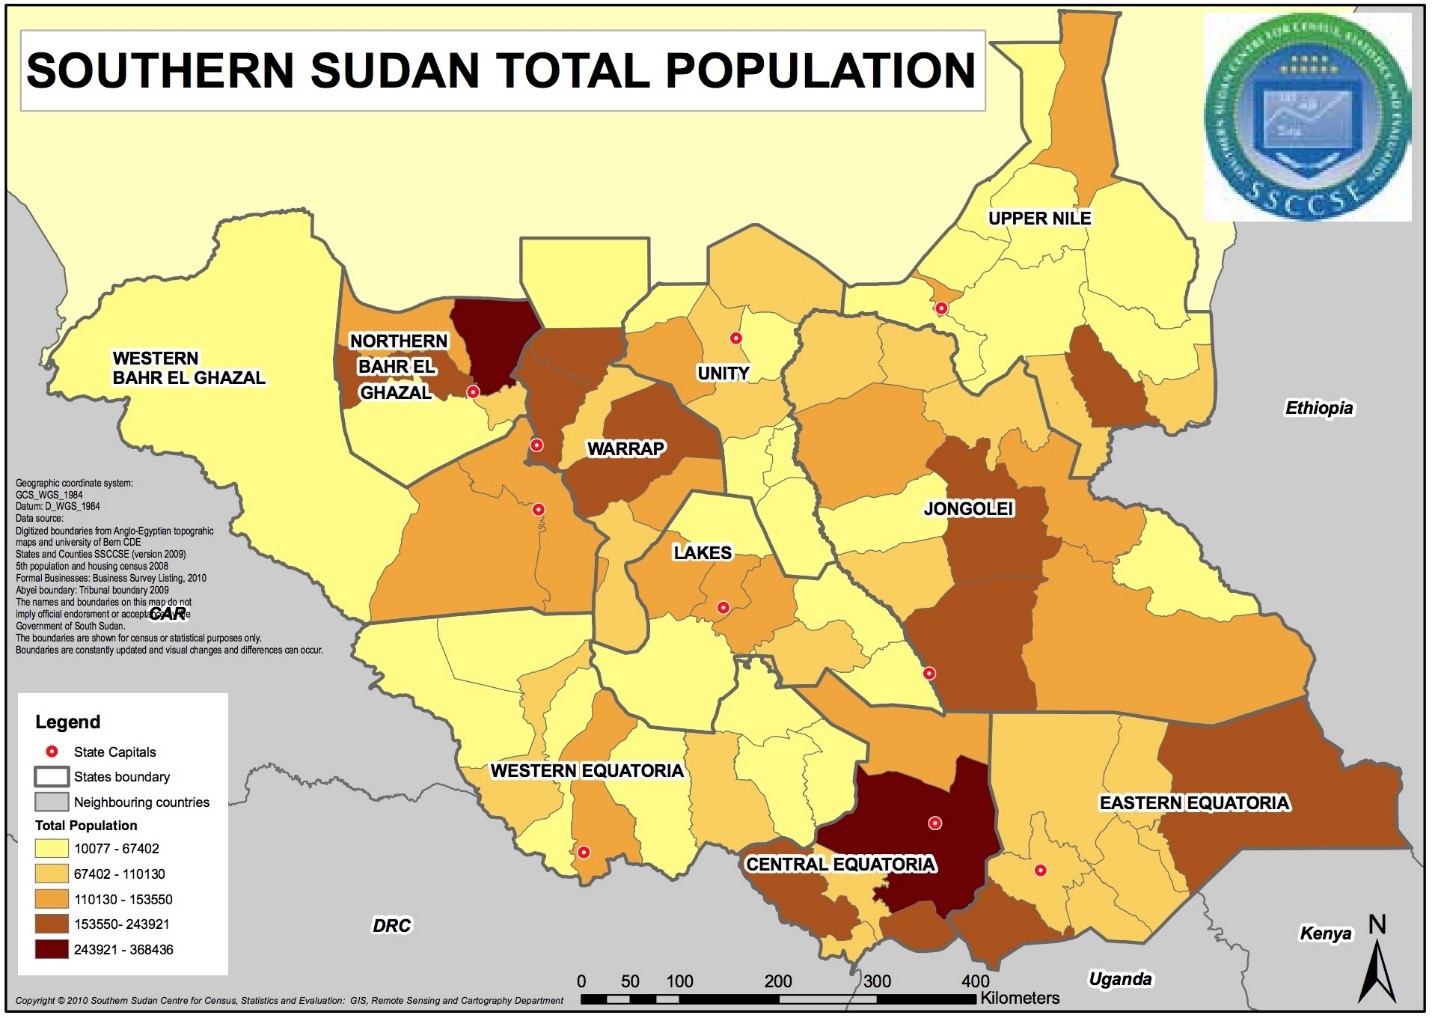 Over 300k babies born in South Sudan every year